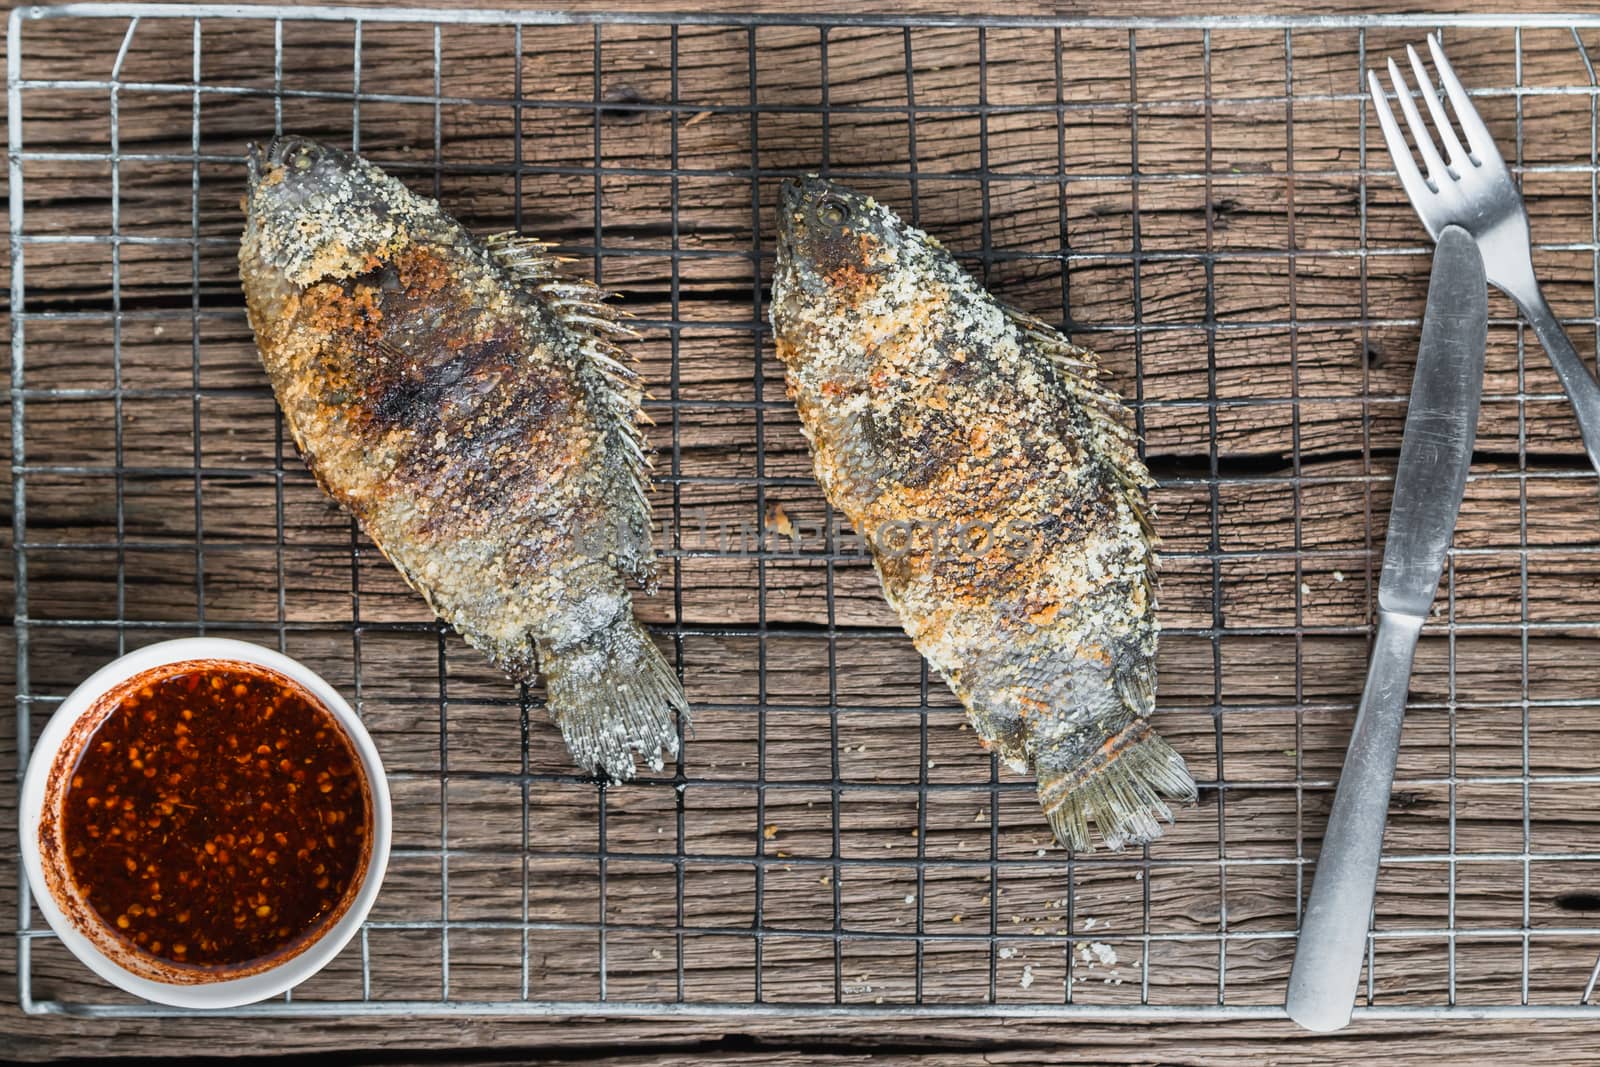 Fresh "Climbing perch" or "Climbing gourami" grilled with salt, Traditional Thai food